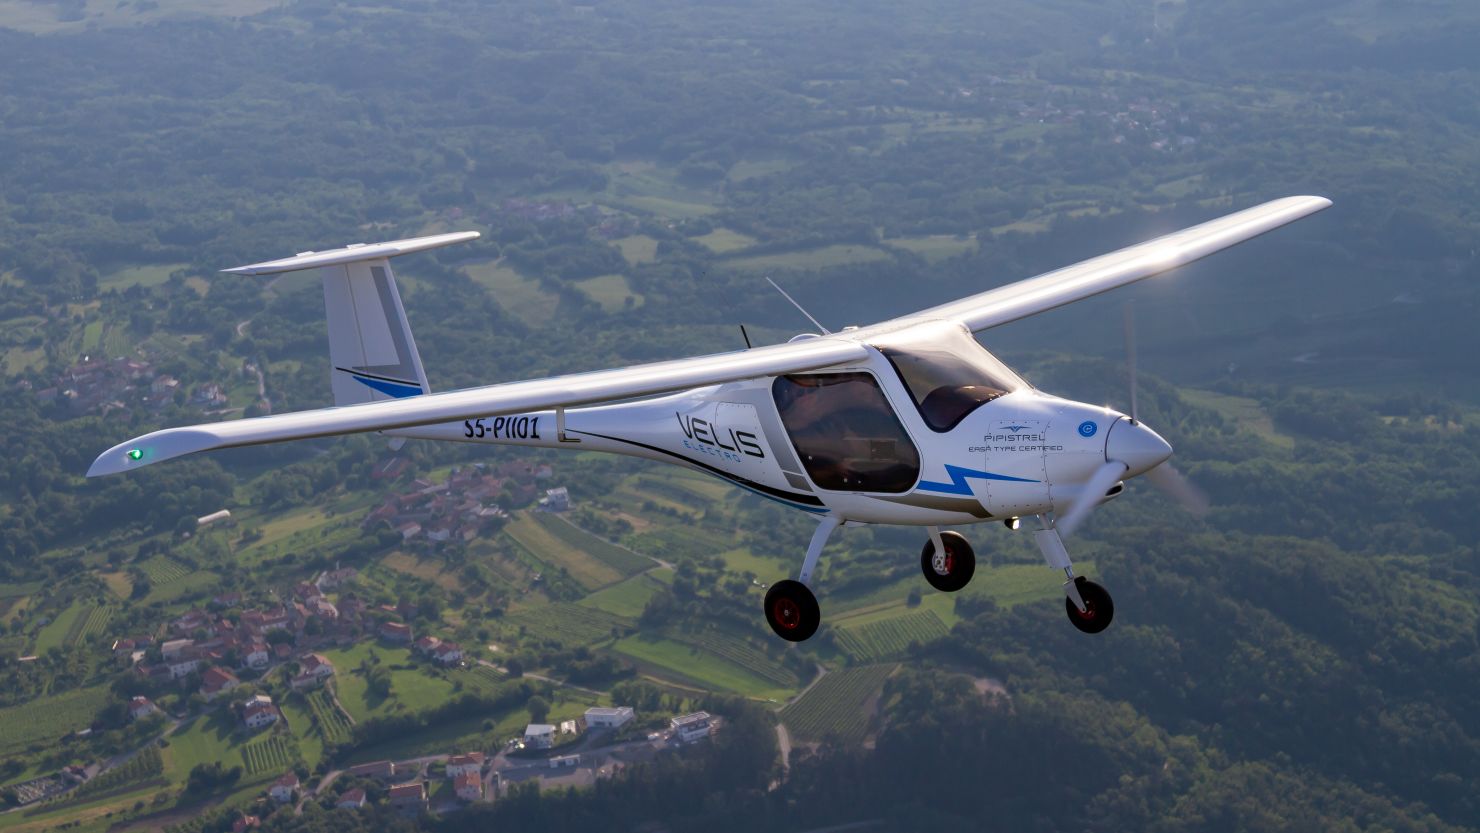 The Pipistrel Velis Electro in flight. The two-seat electric airplane produces no carbon dioxide emissions and is quieter than conventional aircraft.